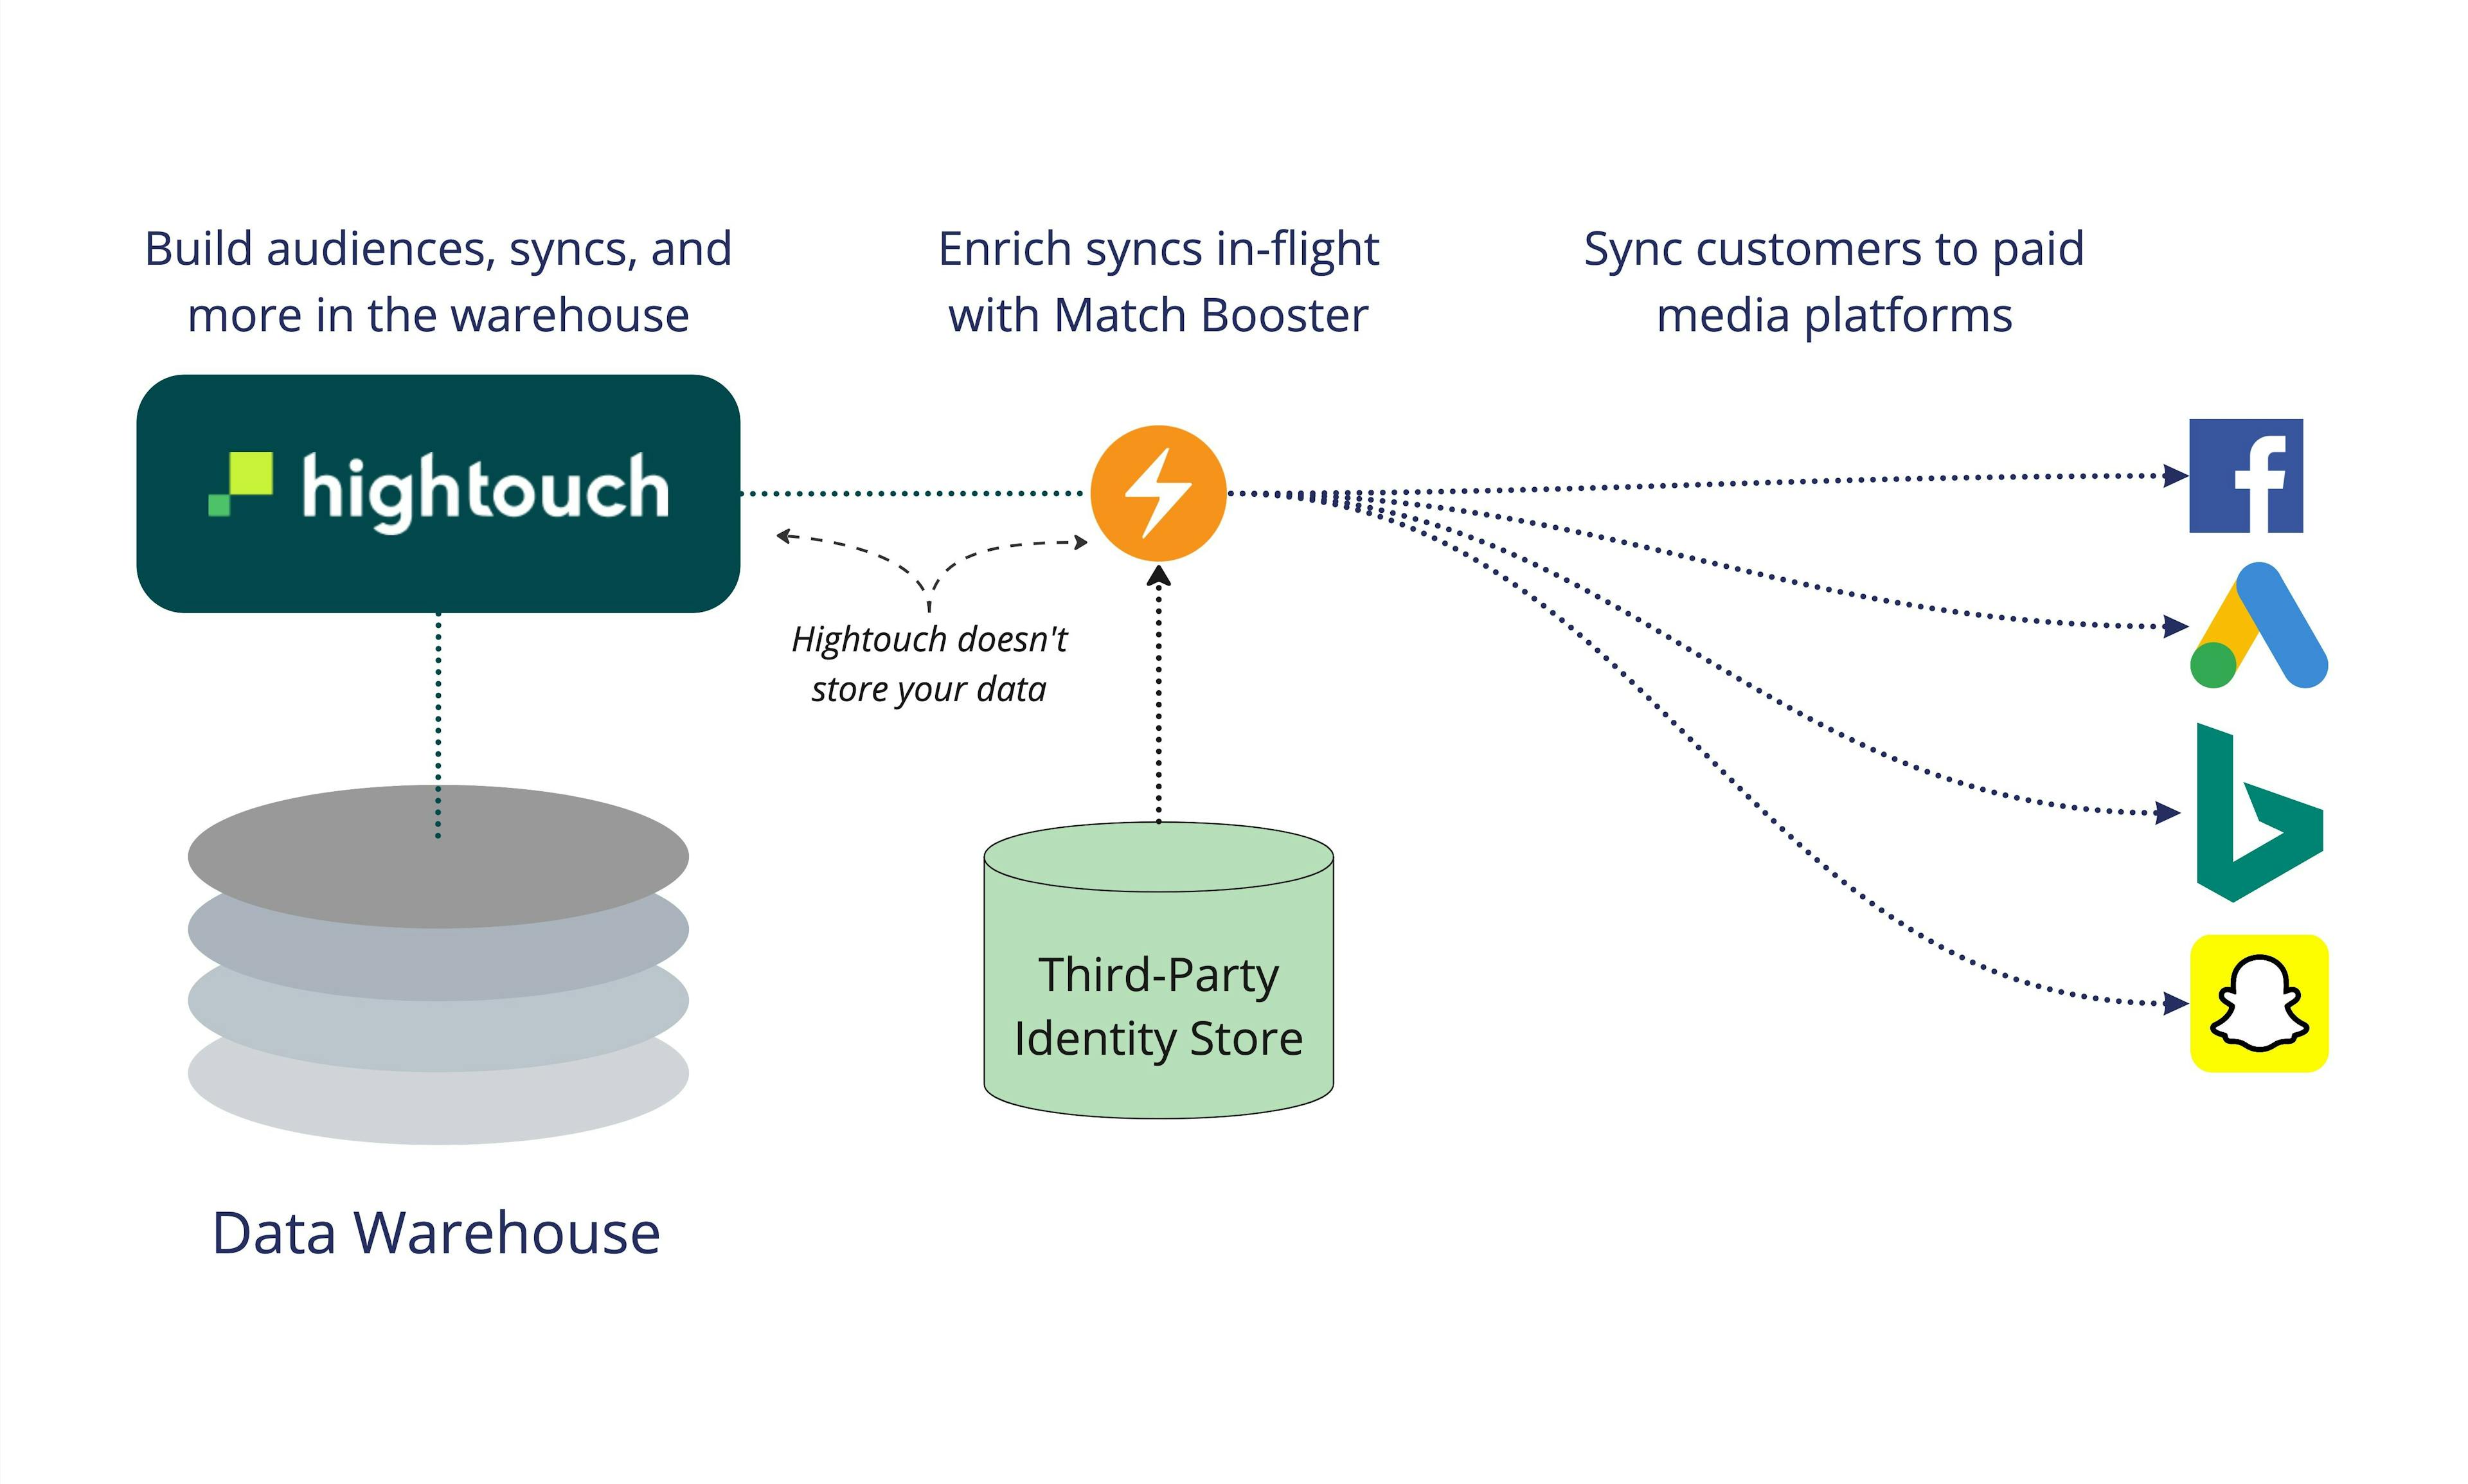 Match Booster's data onboarding architecture